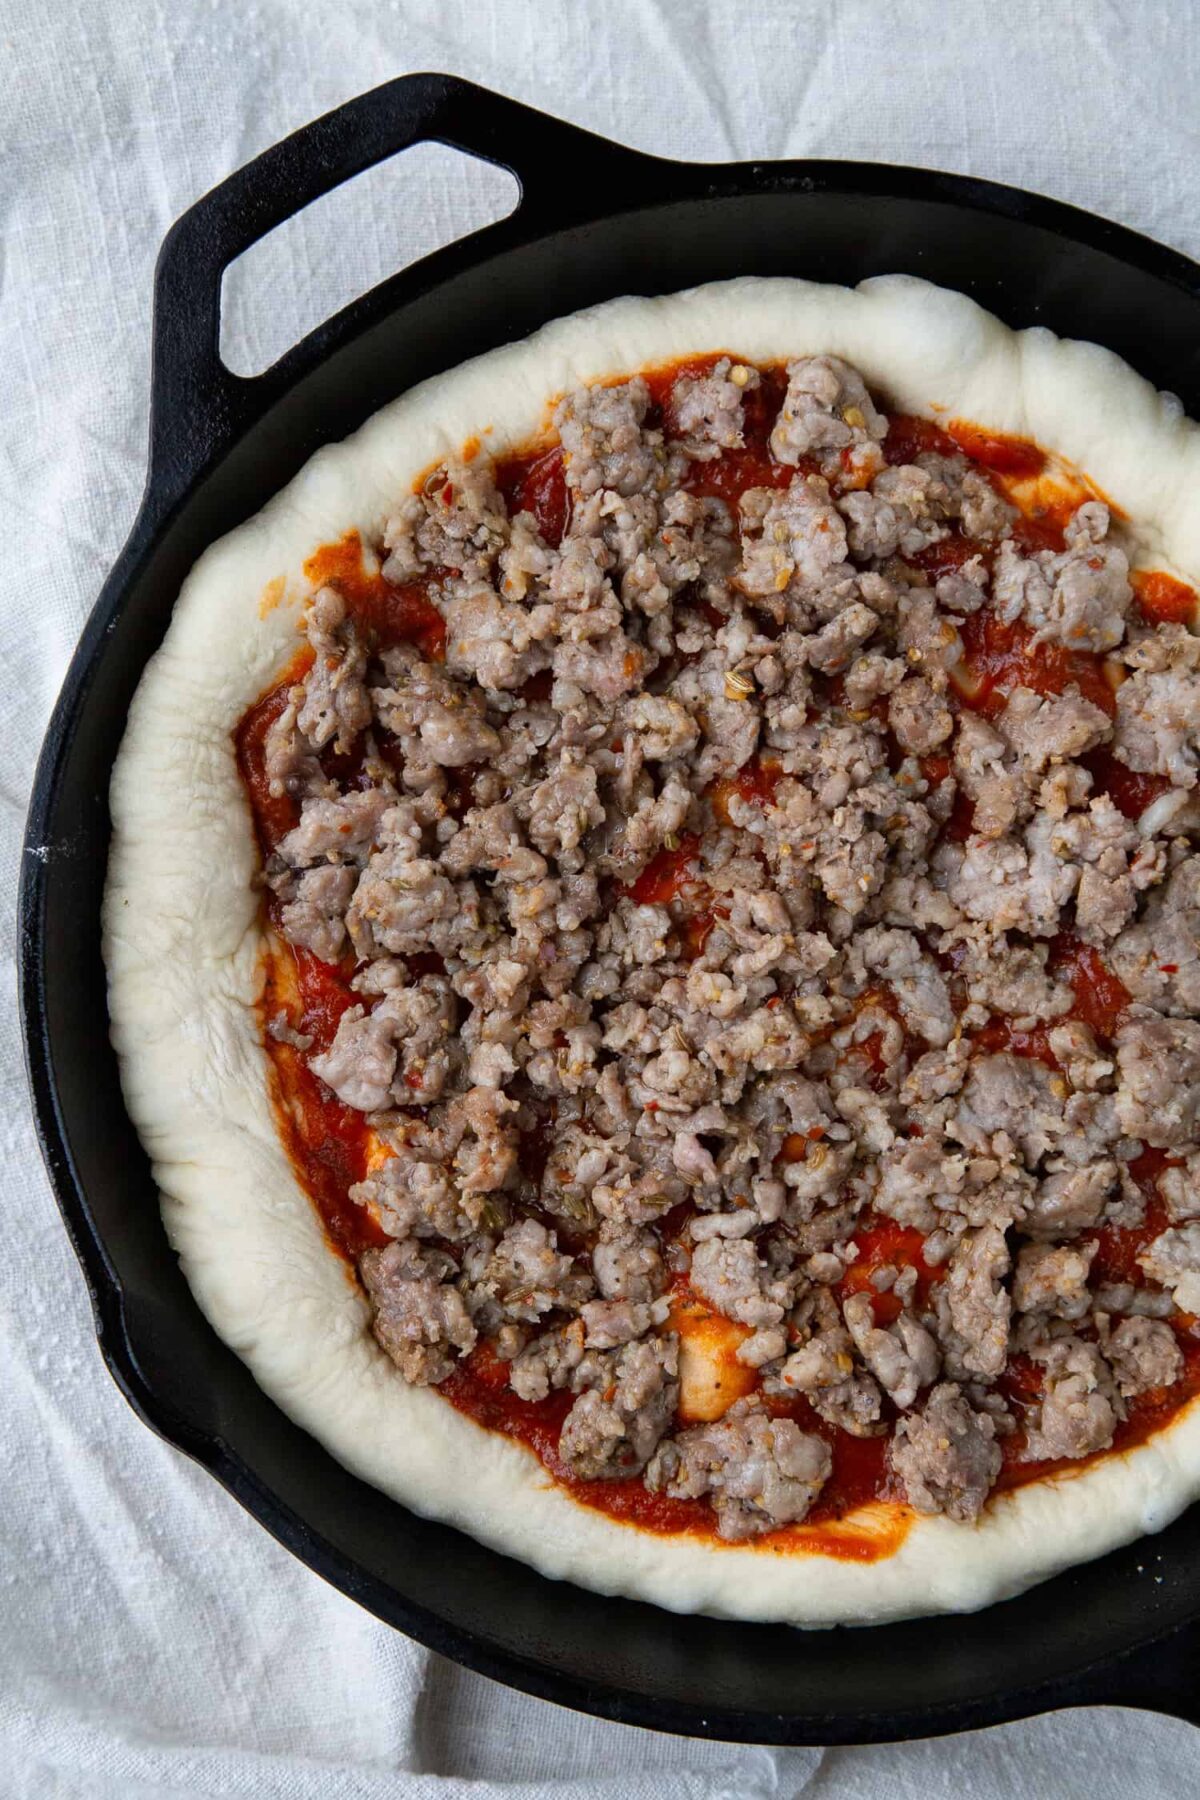 uncooked pizza with sausage in a cast iron skillet